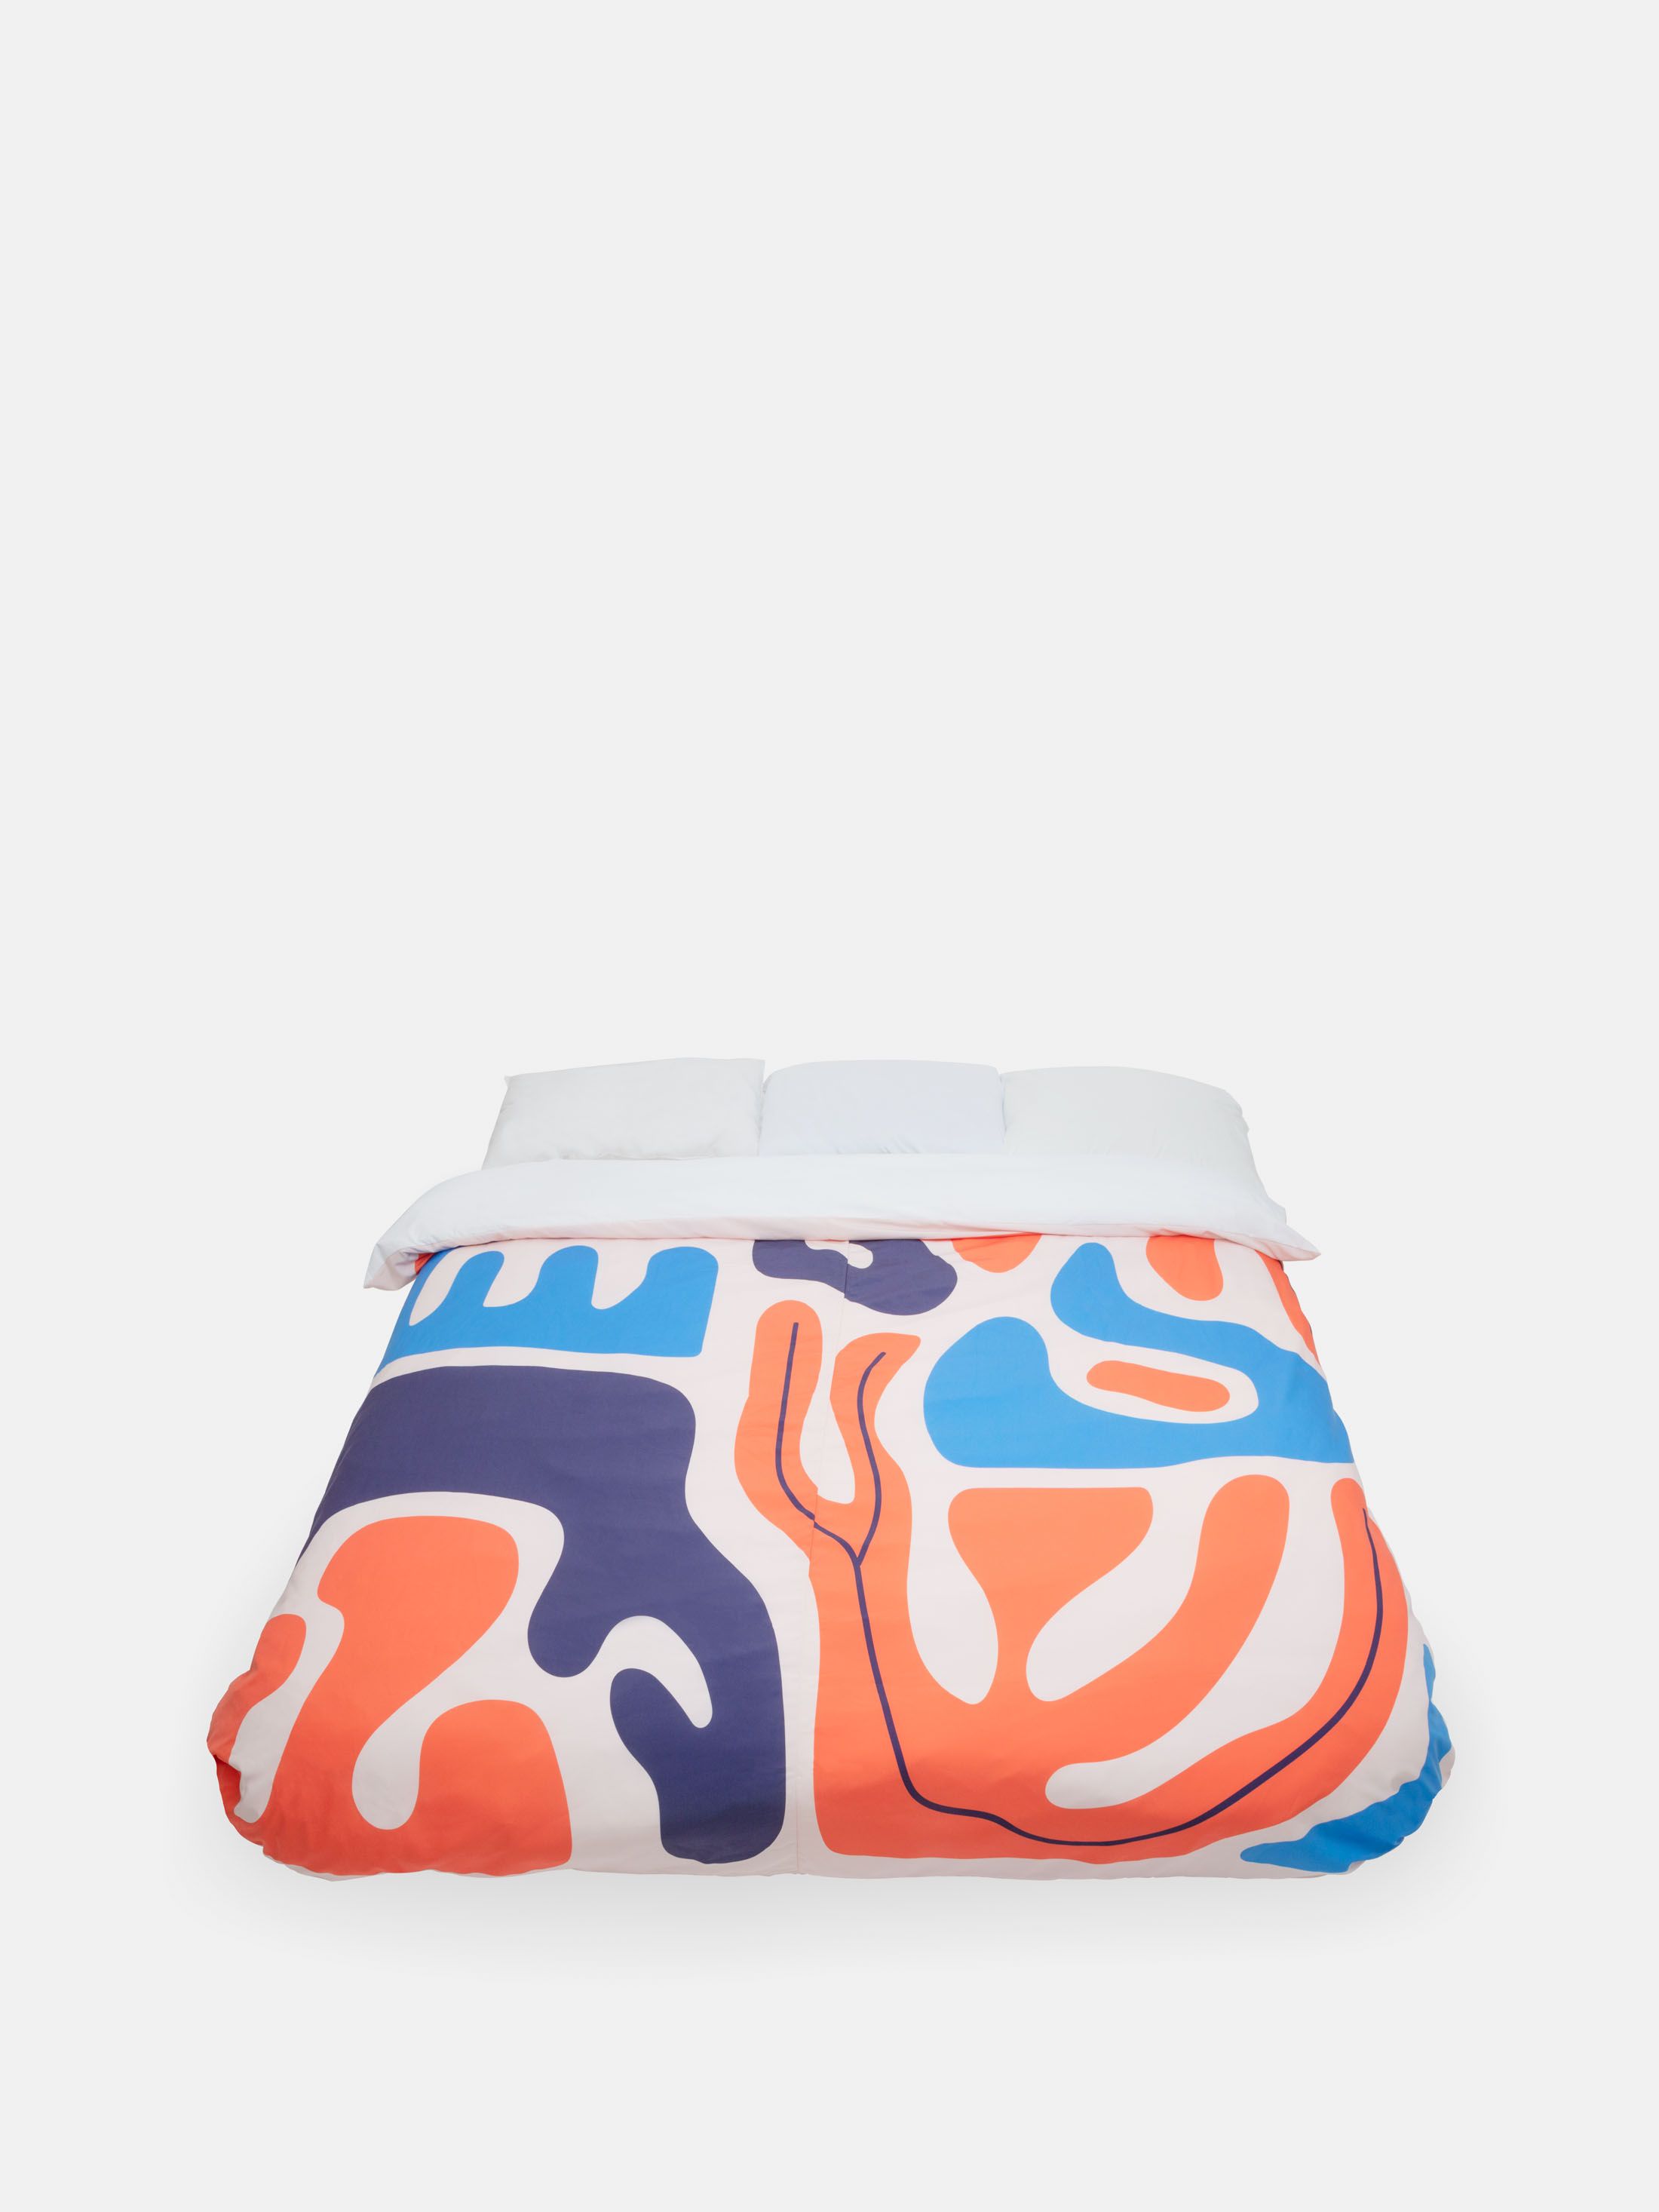 custom duvet covers printed with your designs